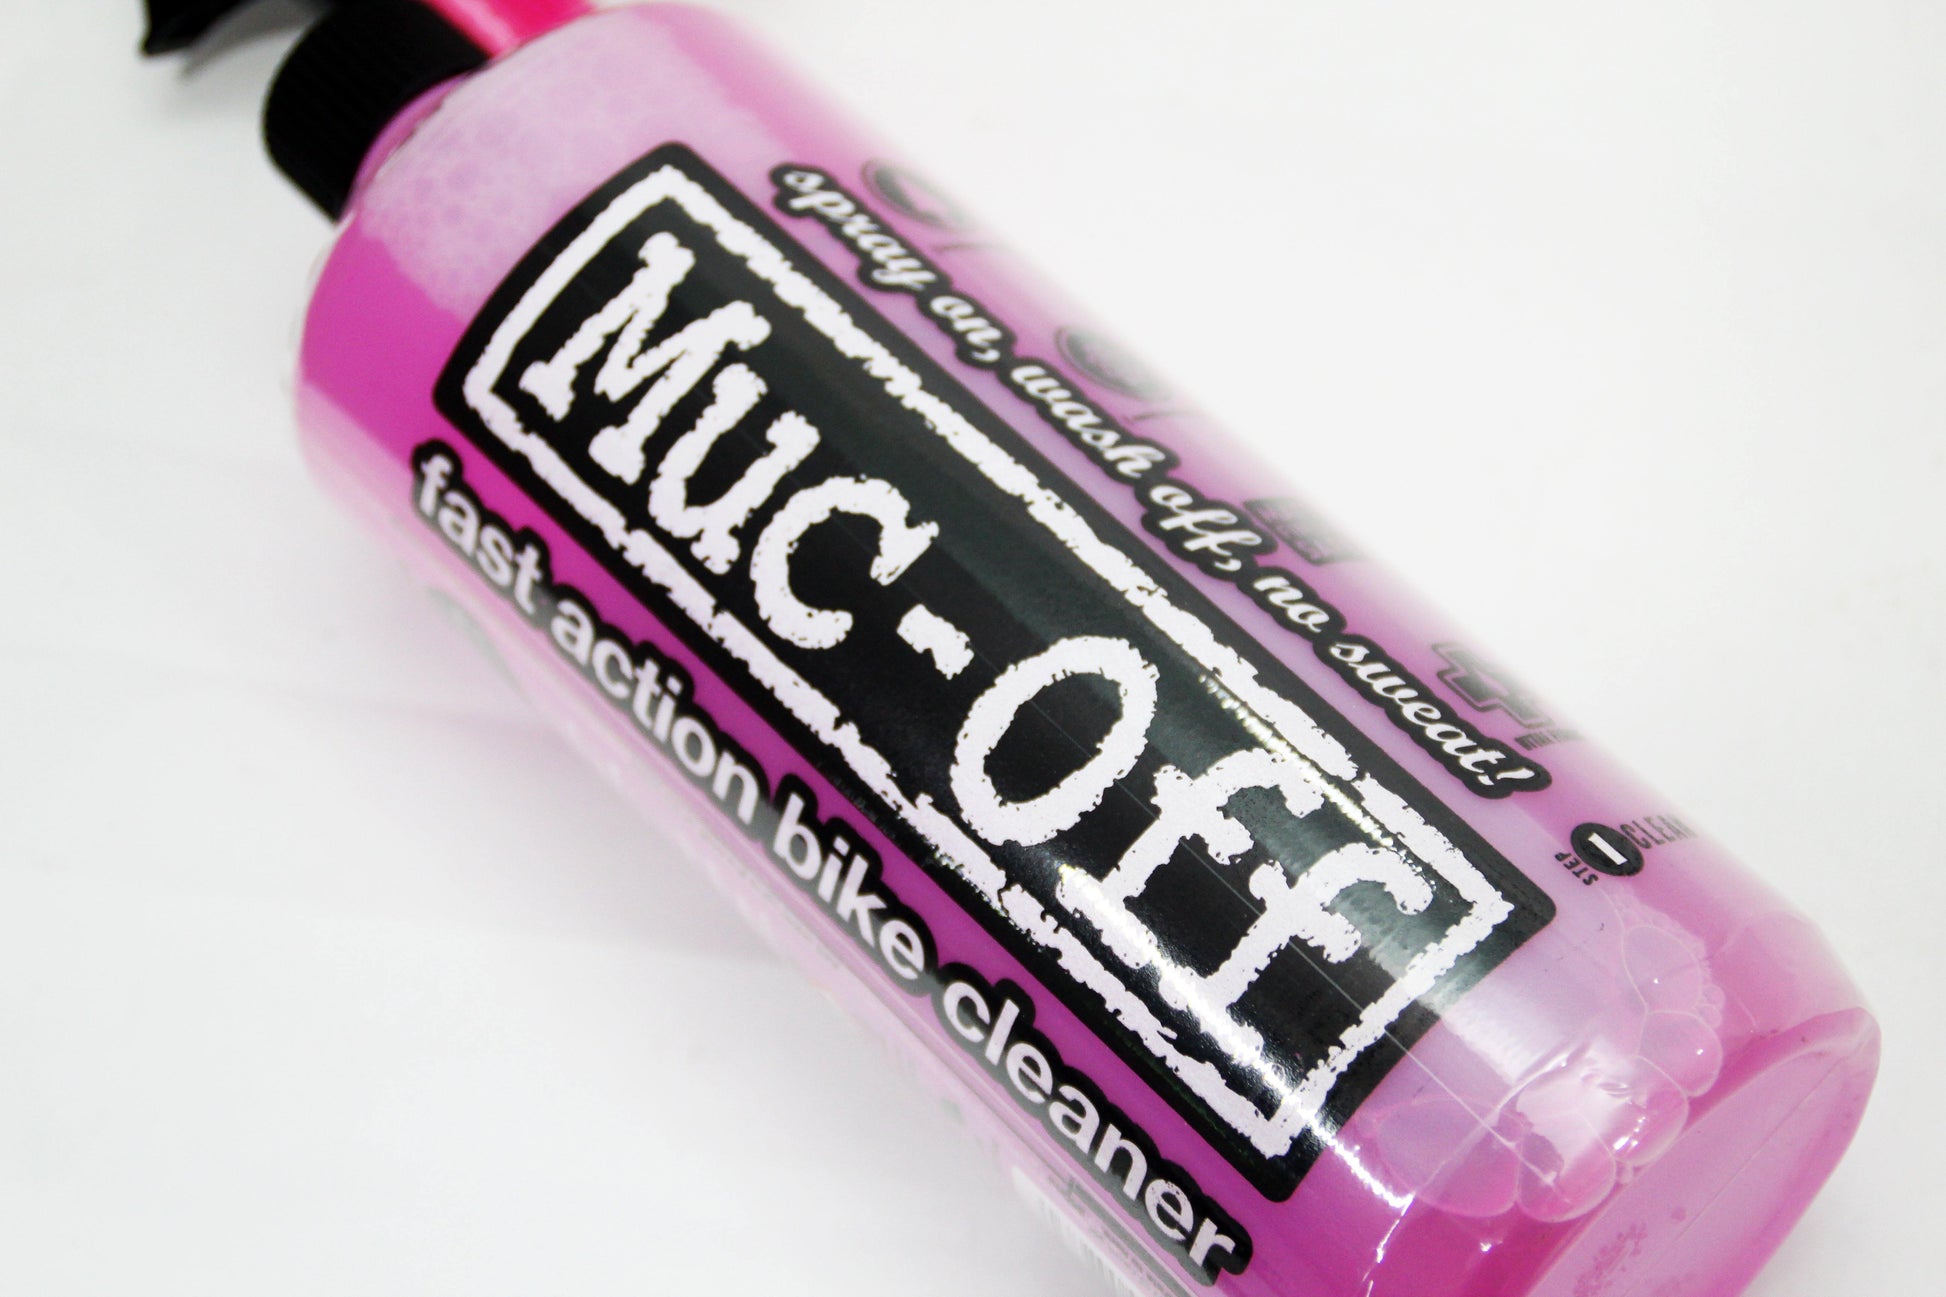 Muc Off Cycle Cleaner Capped With Trigged (1 Litre) - Durian Bikers